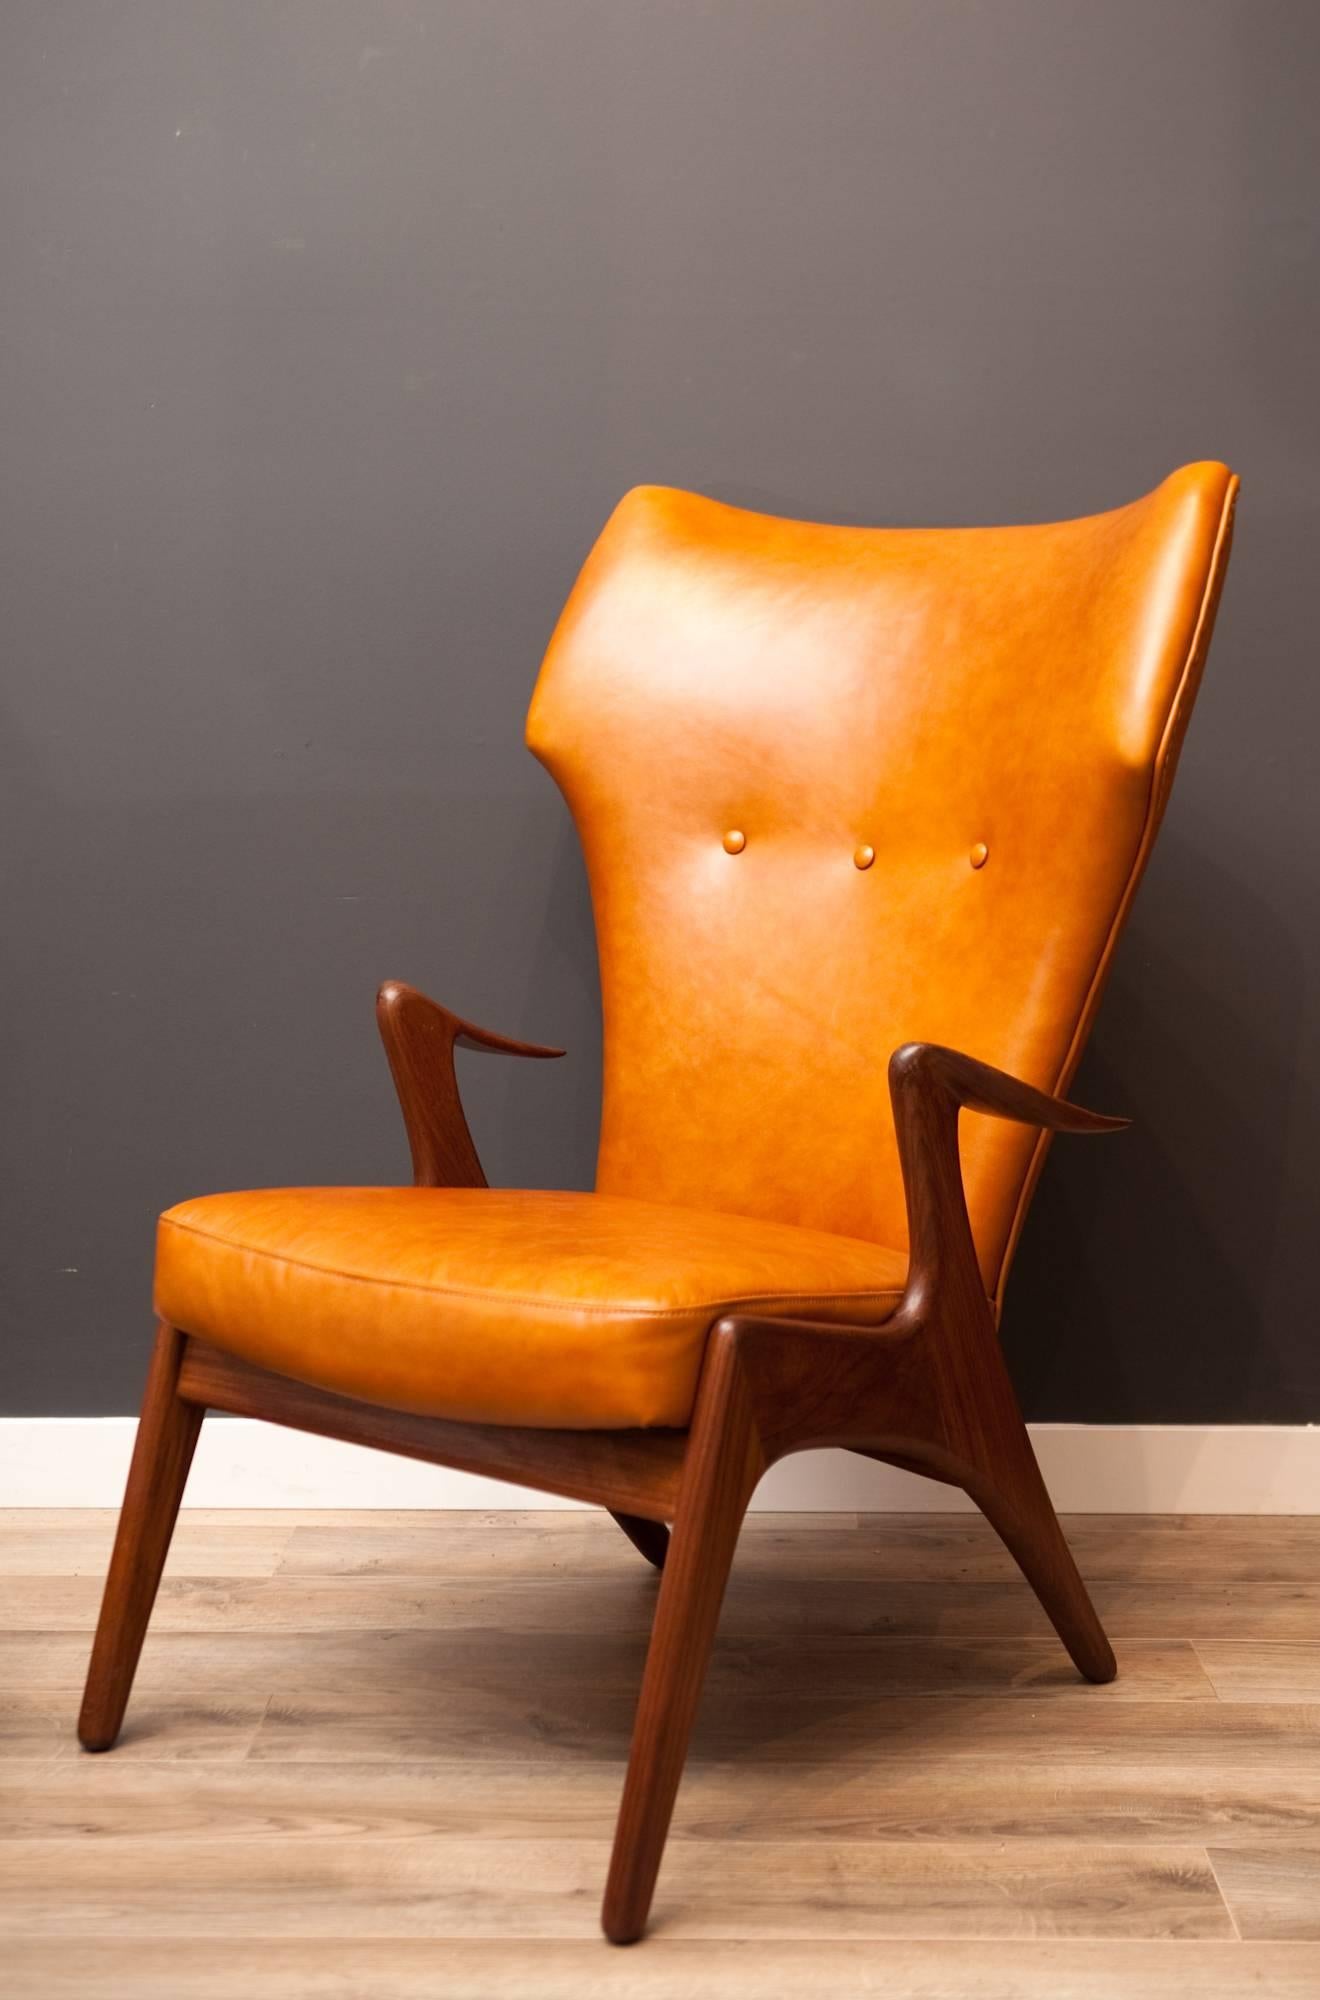 With an awesome modernist take on the traditional wing chair, this spectacular teak frame lounger by Danish design icon Kurt Ostervig is a gem! Check out the sultry wing-shaped arms, which appear to float from the frame and give the chair an